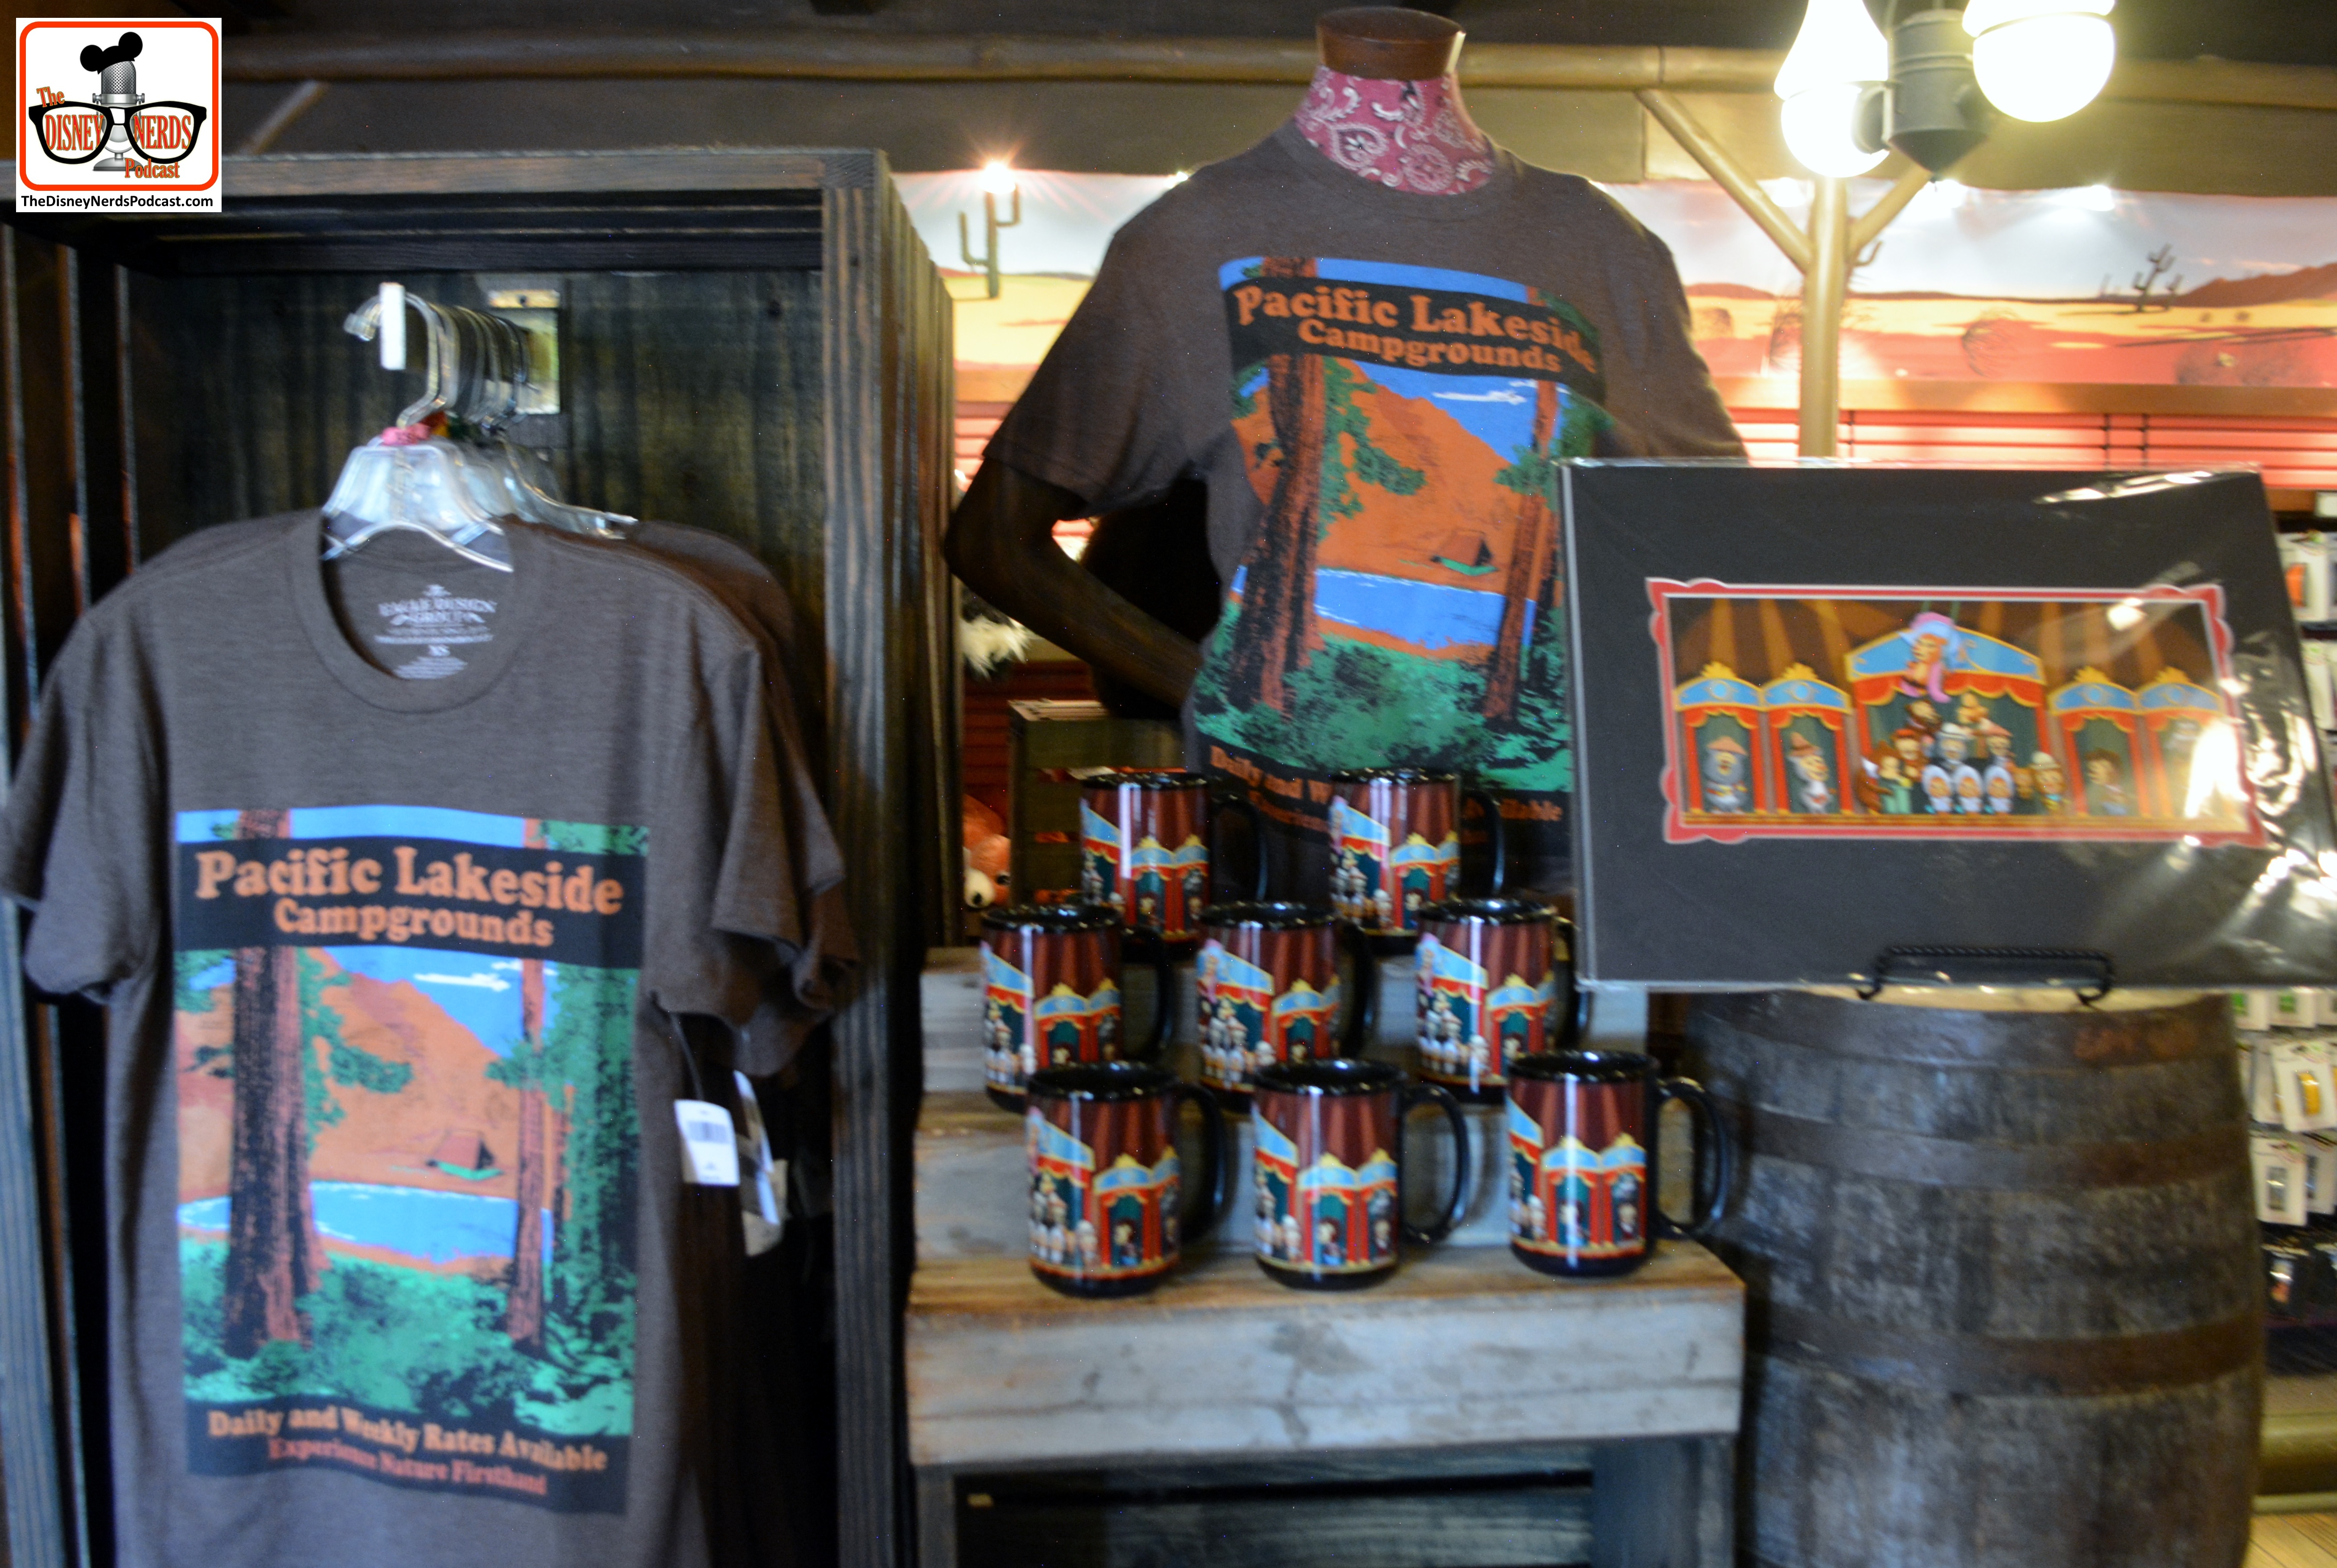 New "Pacific Lakeside Campgrounds" merchandise in Frontierland.